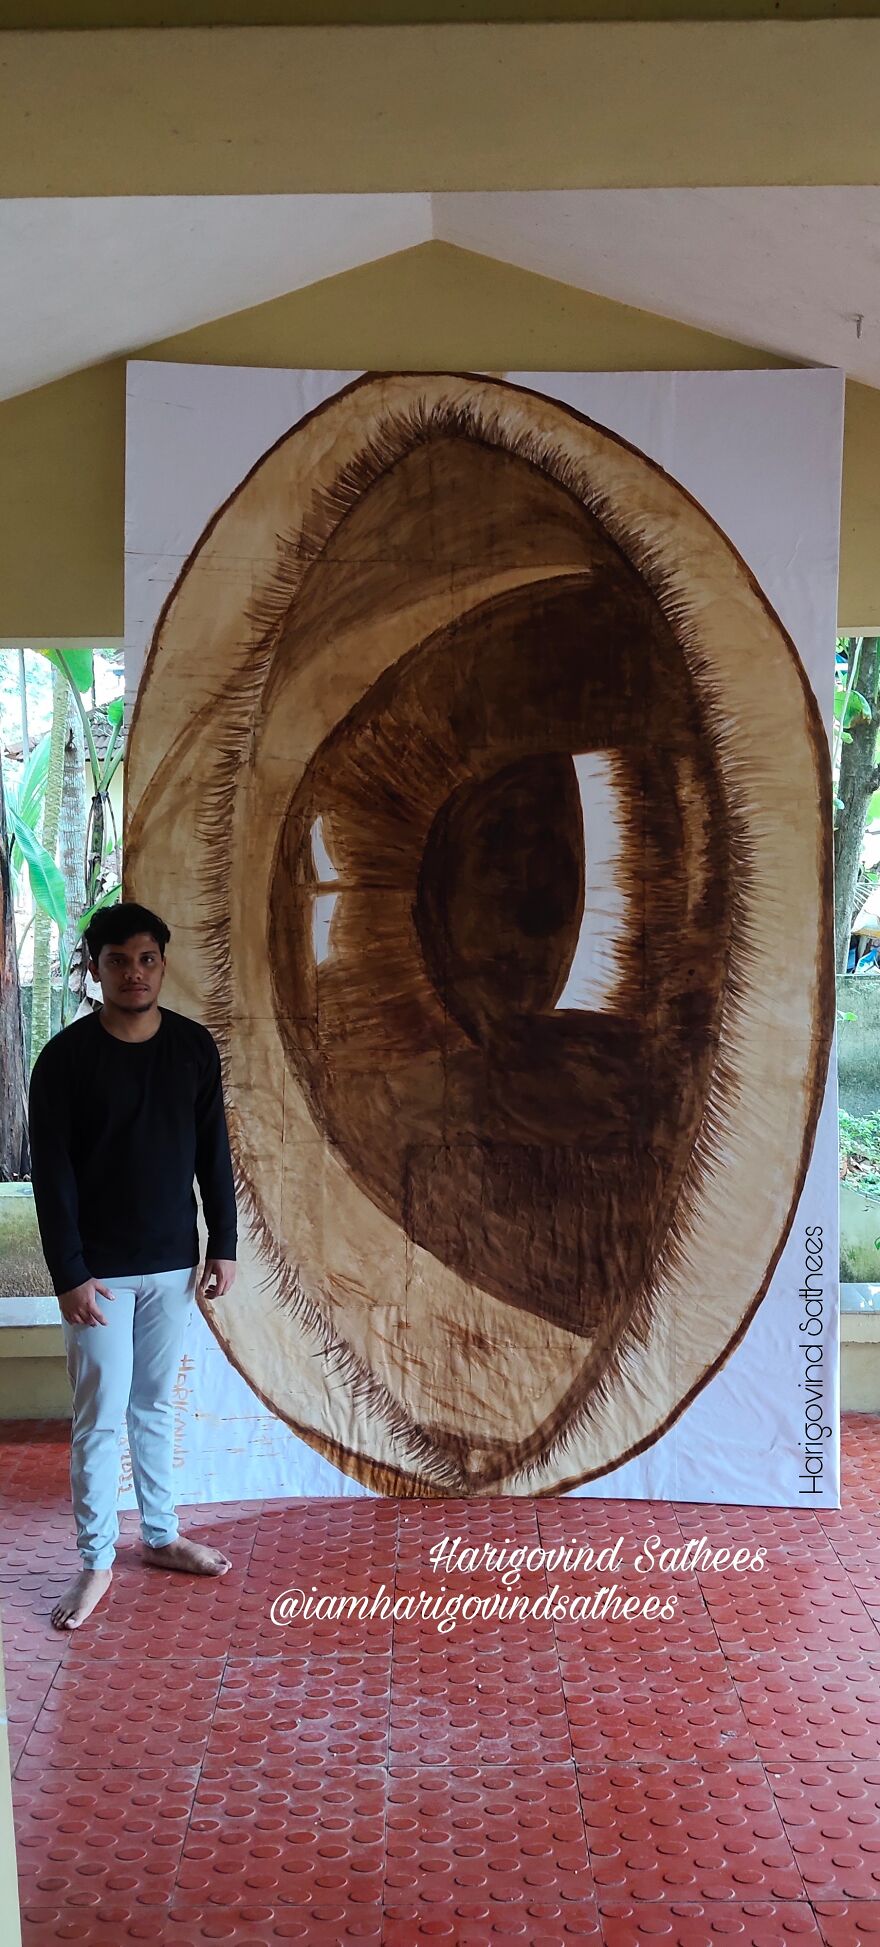 My Largest Coffee Painting Of Realistic Human Eye..... In 10 Feet 3 Inches - 314×200 Cms